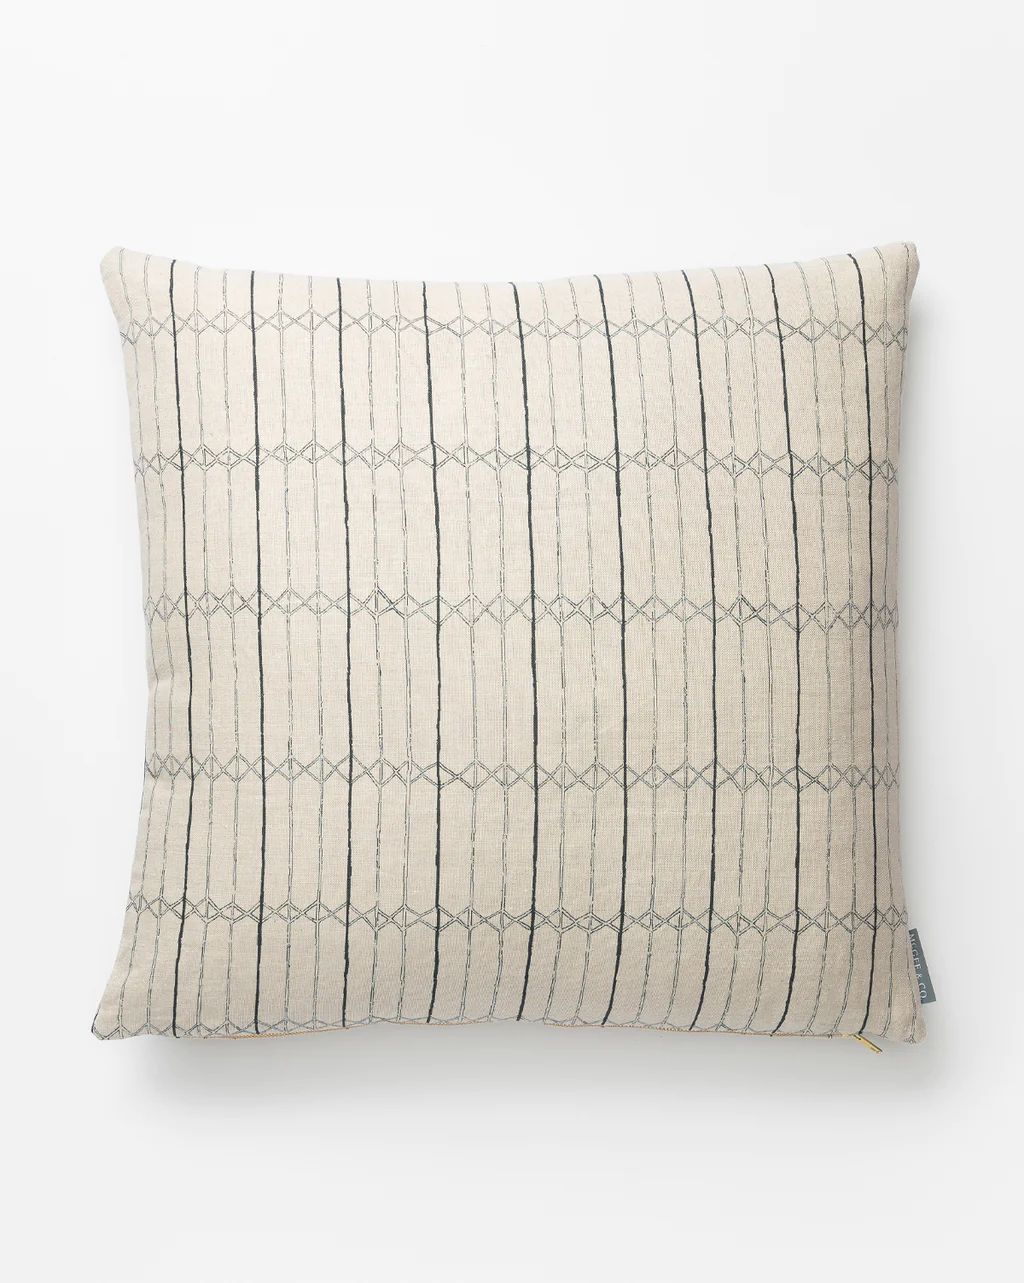 Minerva Pillow Cover | McGee & Co.